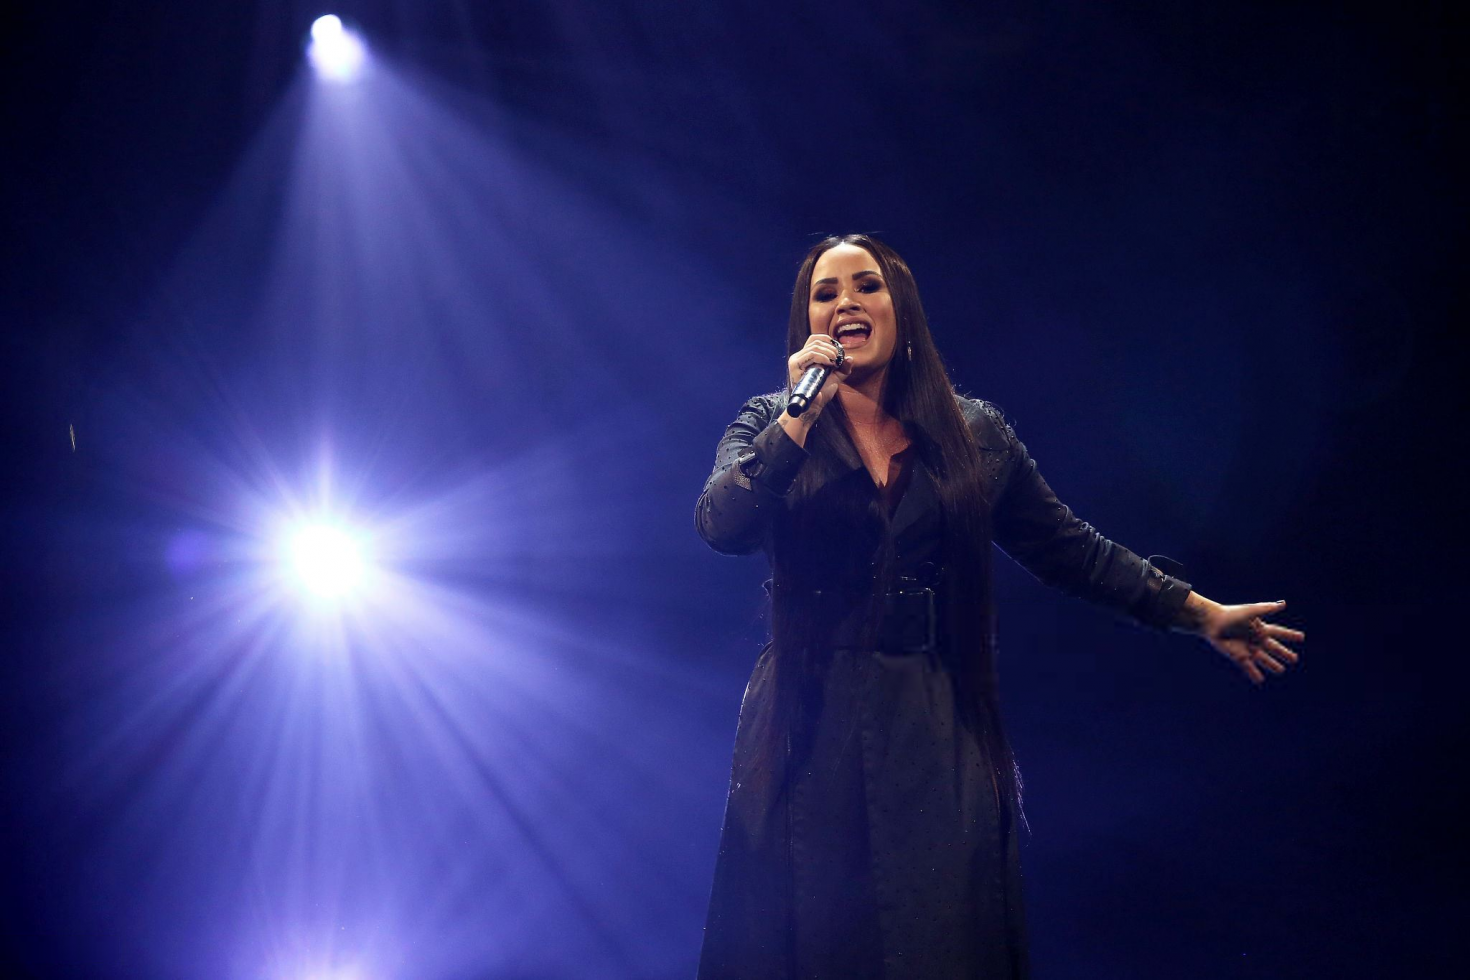 Demi Lovato â€“ Performing at the O2 Arena in London